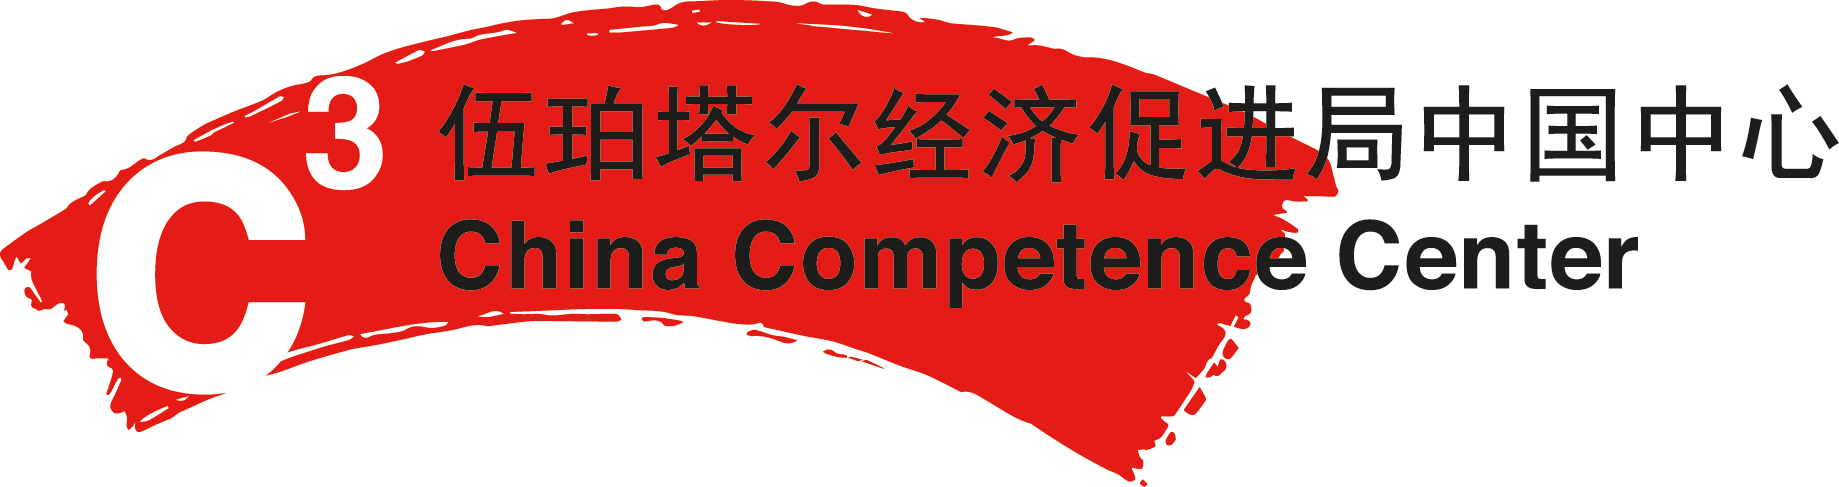 Logo des China Competence Centers Wuppertal